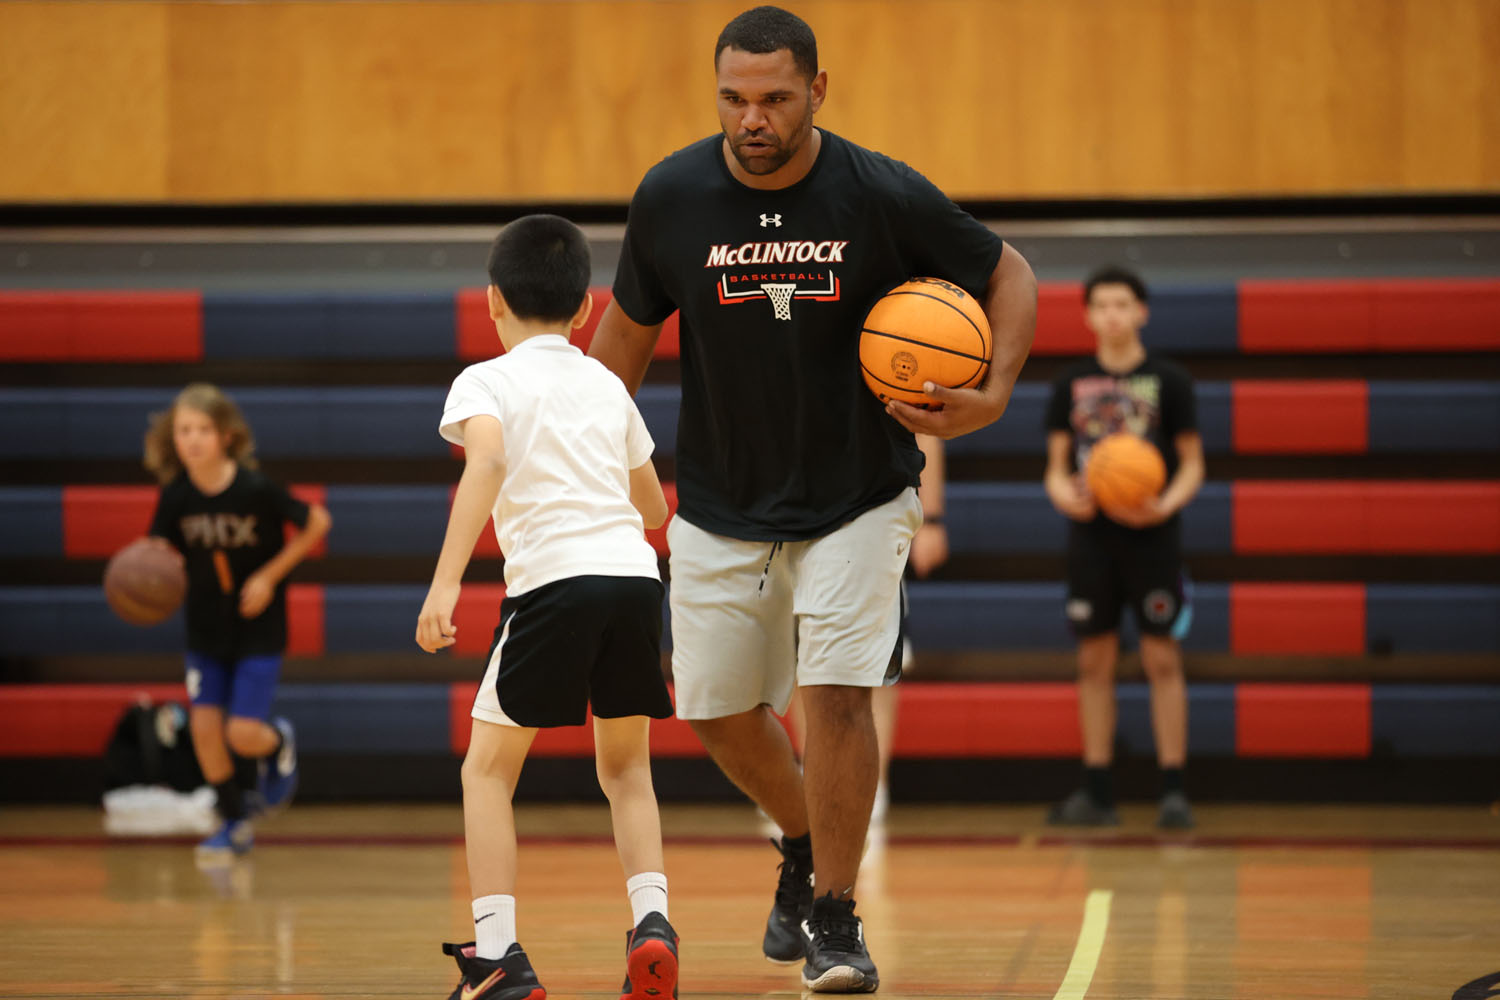 Coach helping a camper learn to dribble